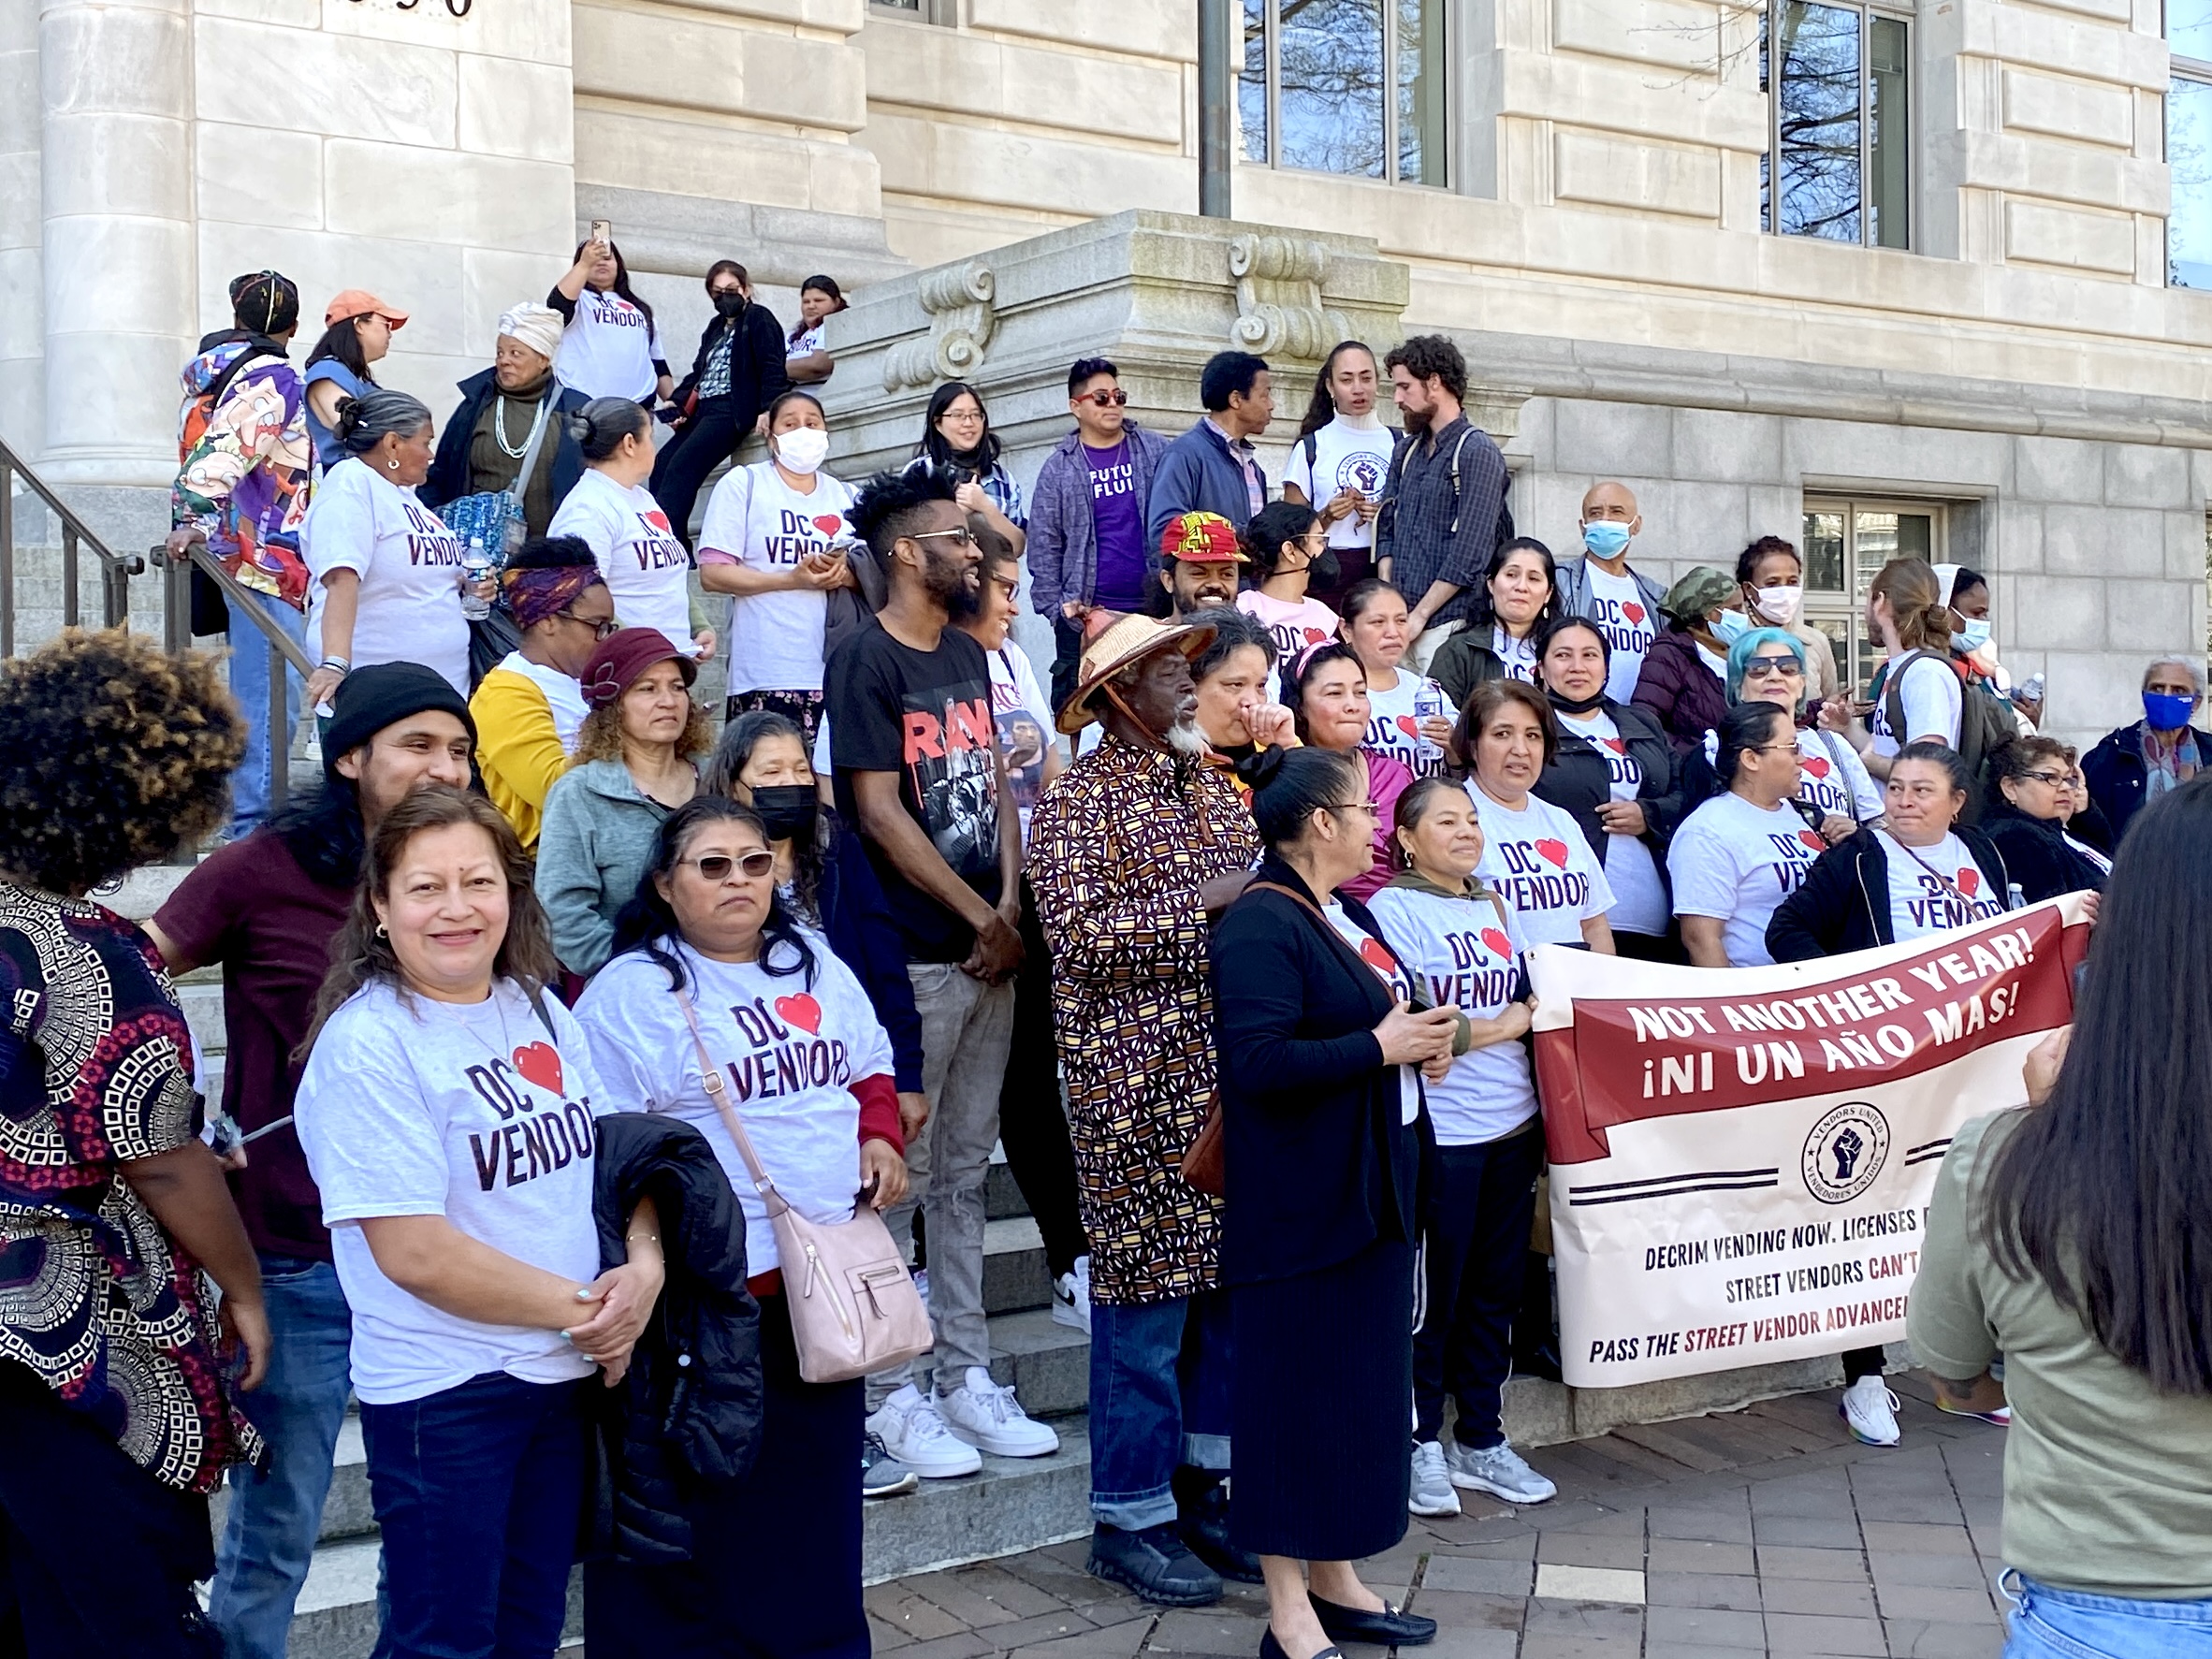 A large group of vendors, many in shirts that read vendadores unidos with a heart, stand on the steps of the Wilson Building. They appear to be cheering.